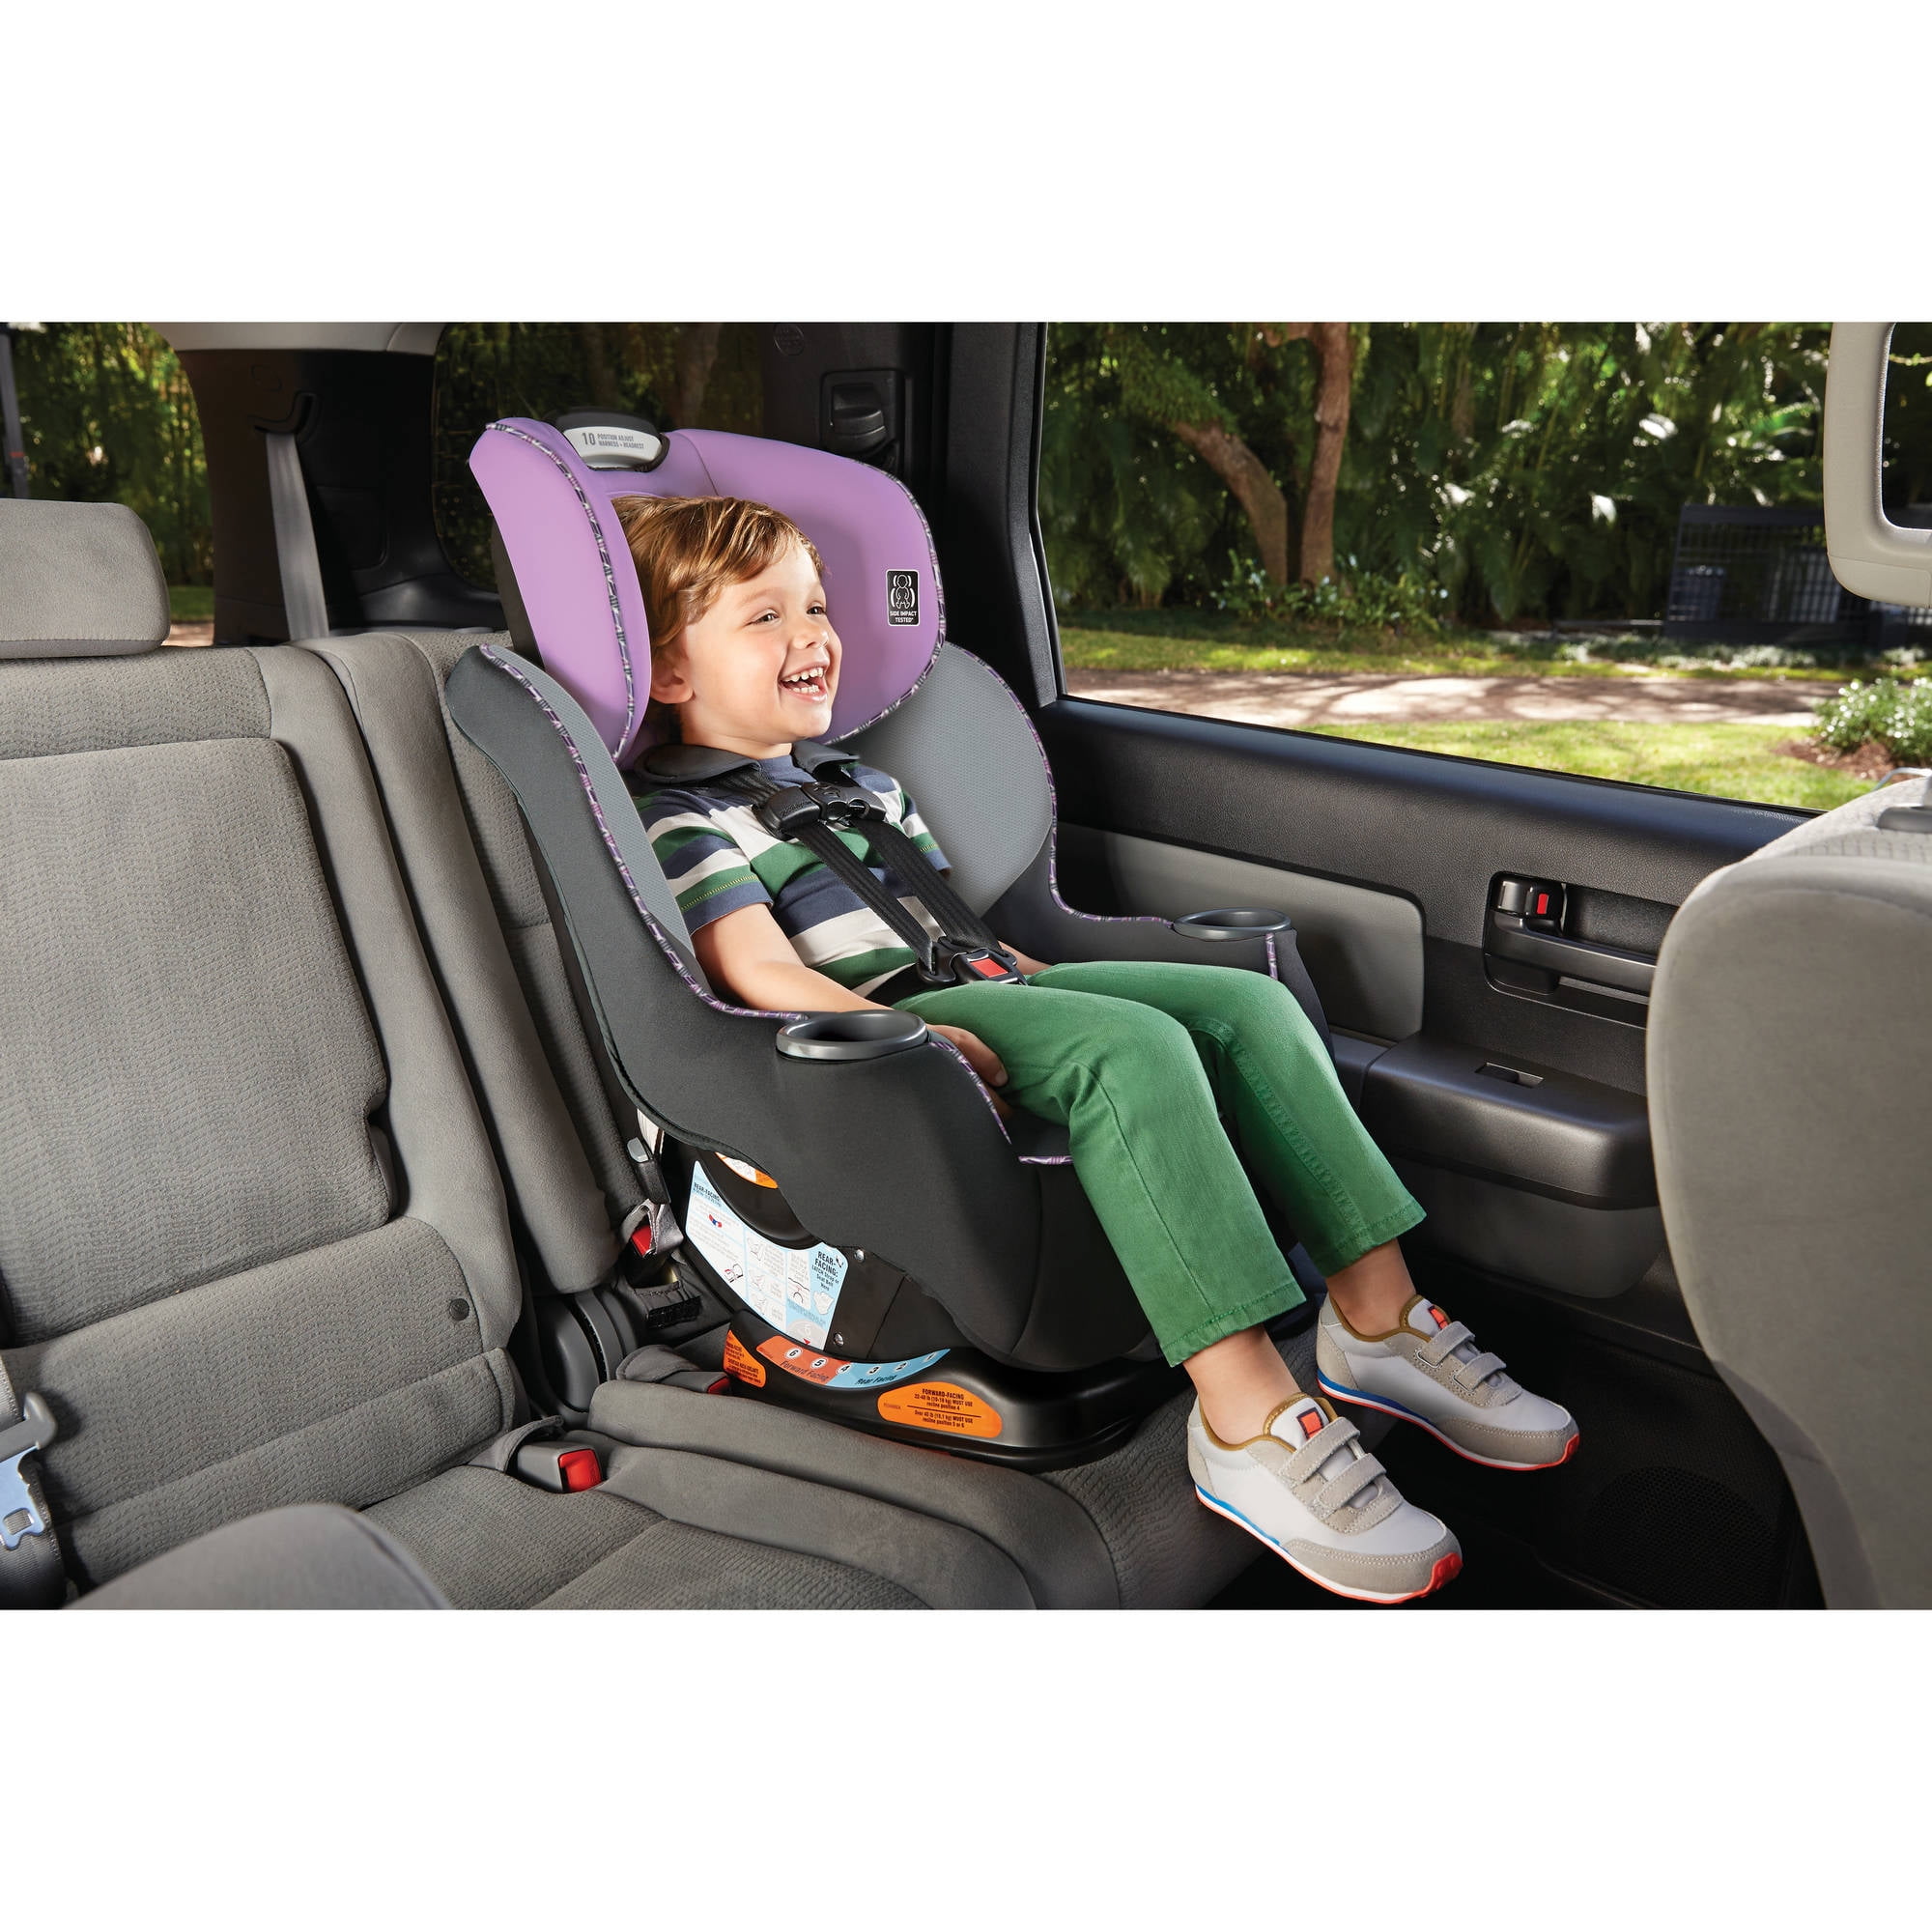 sequence 65 convertible car seat